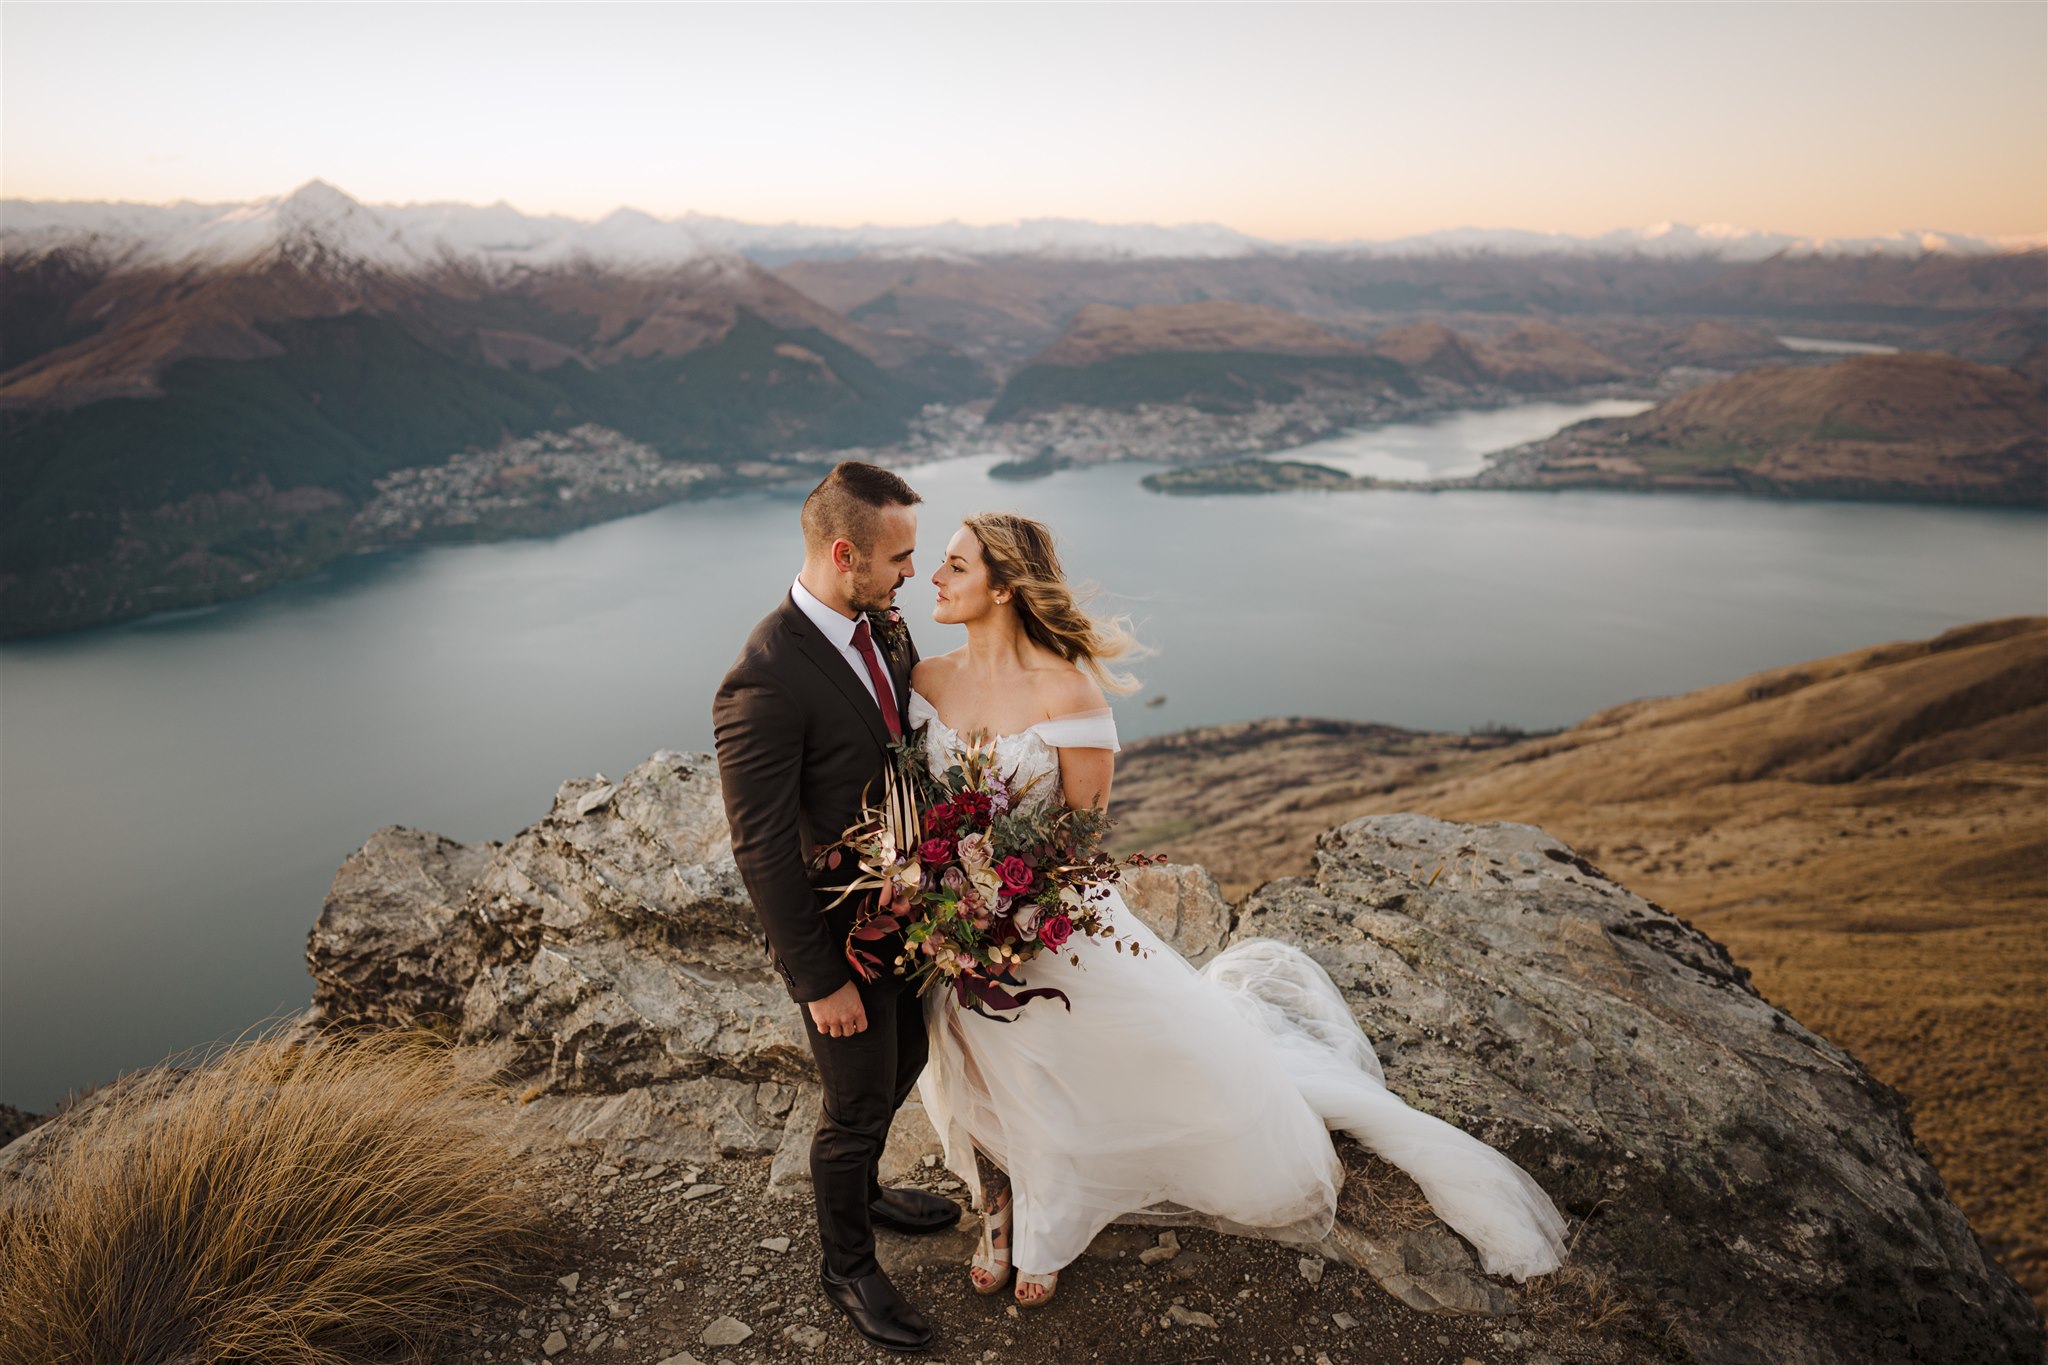 bride and groom at The Ledge, Cecil Peak, Queenstown, New Zealand with Lake Wakatipu